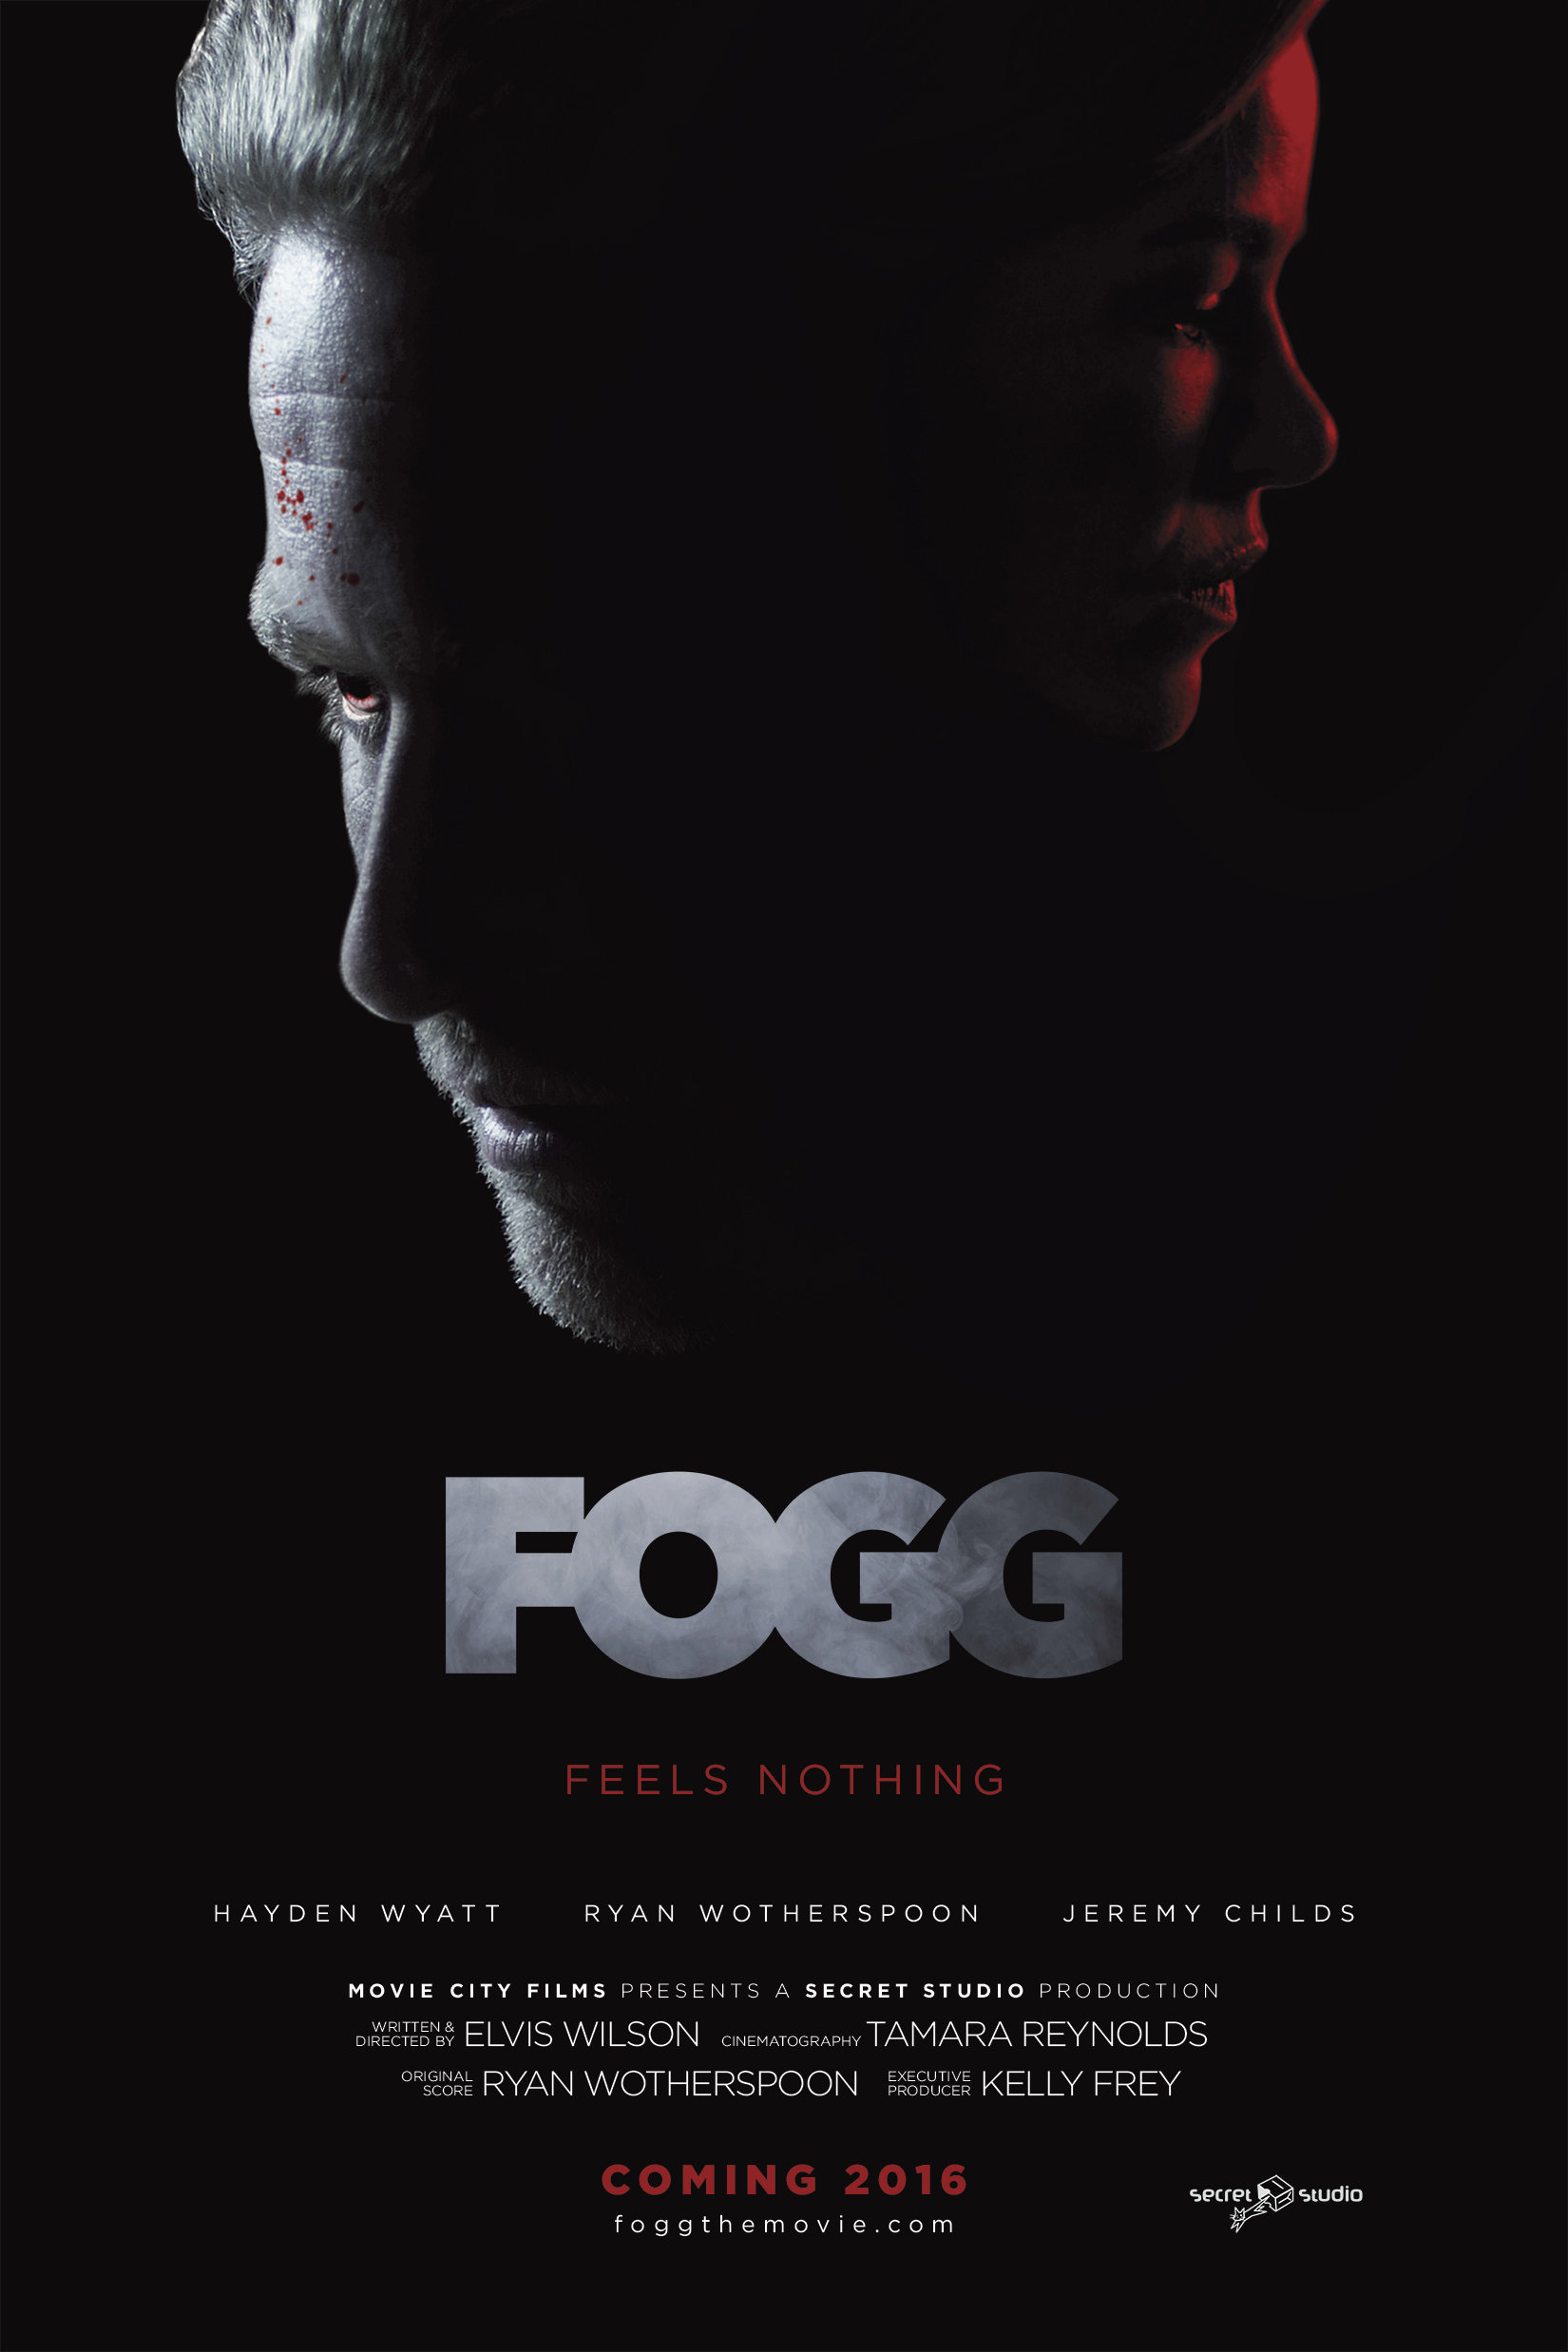 Fogg (2018) starring Ryan Wotherspoon on DVD on DVD